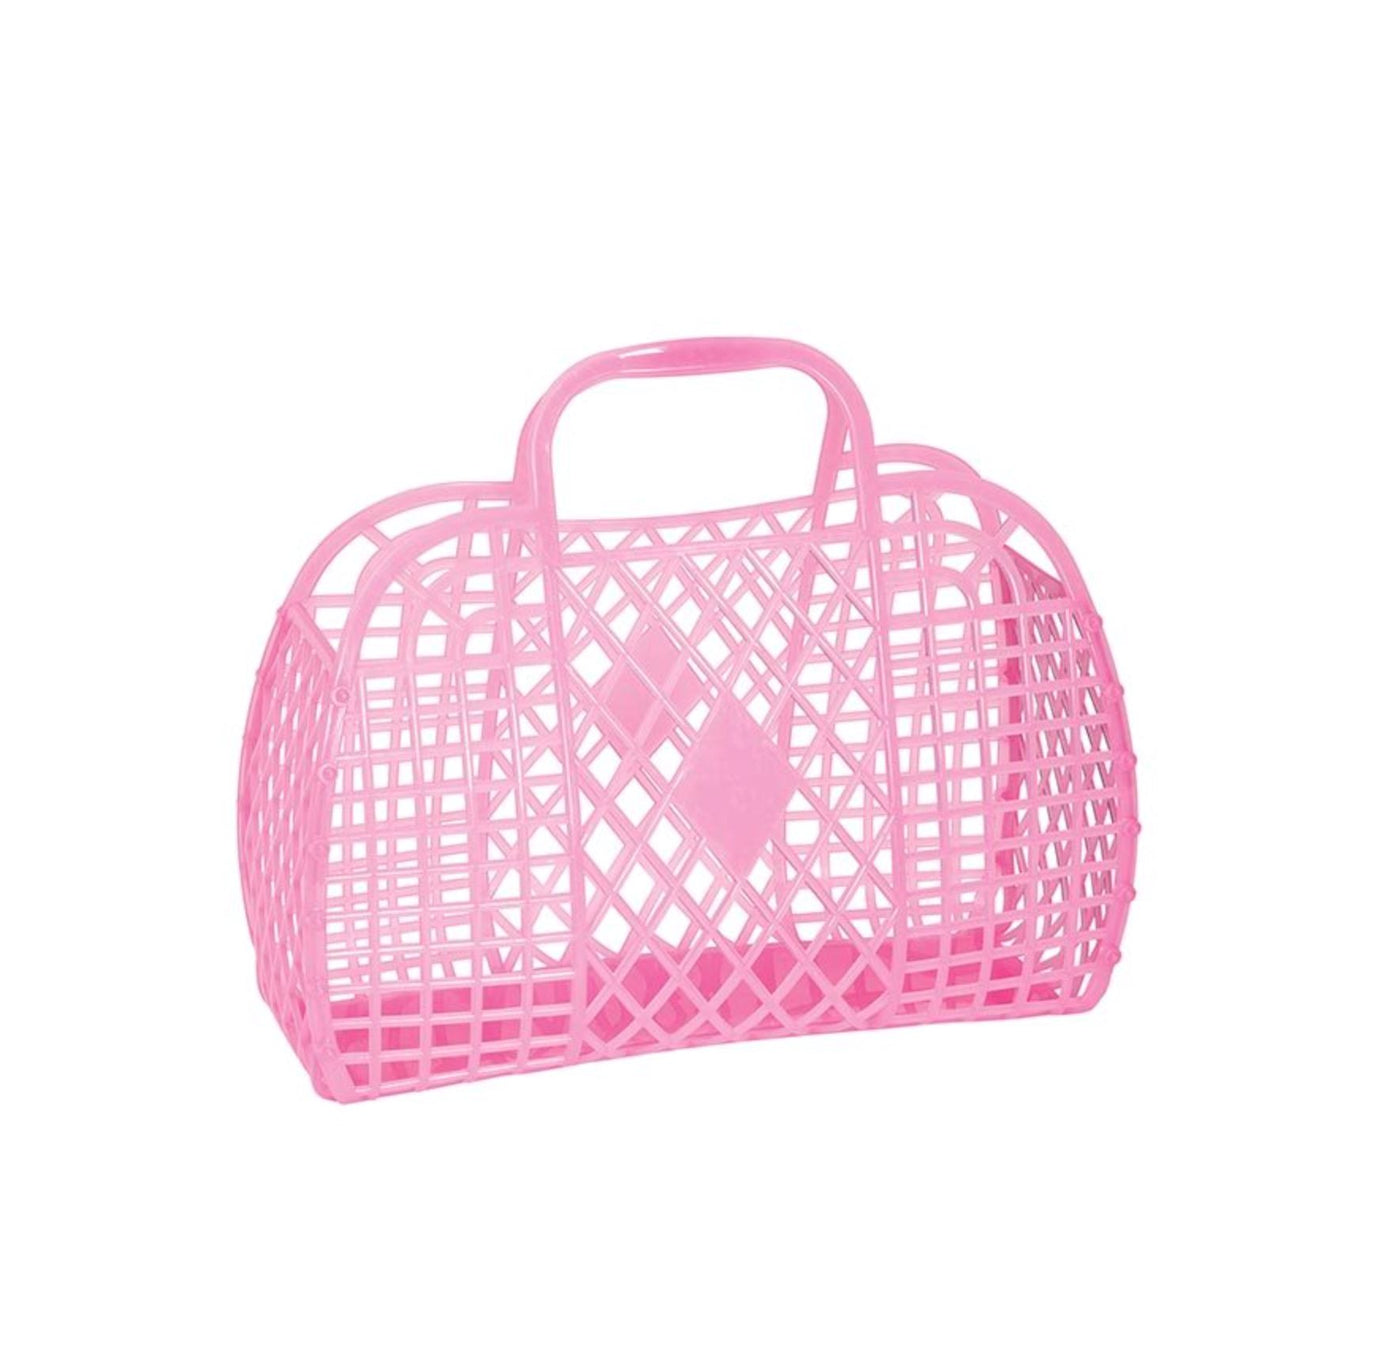 Sun Jellies Retro Basket Small - Neon Pink Basket IS Gifts 